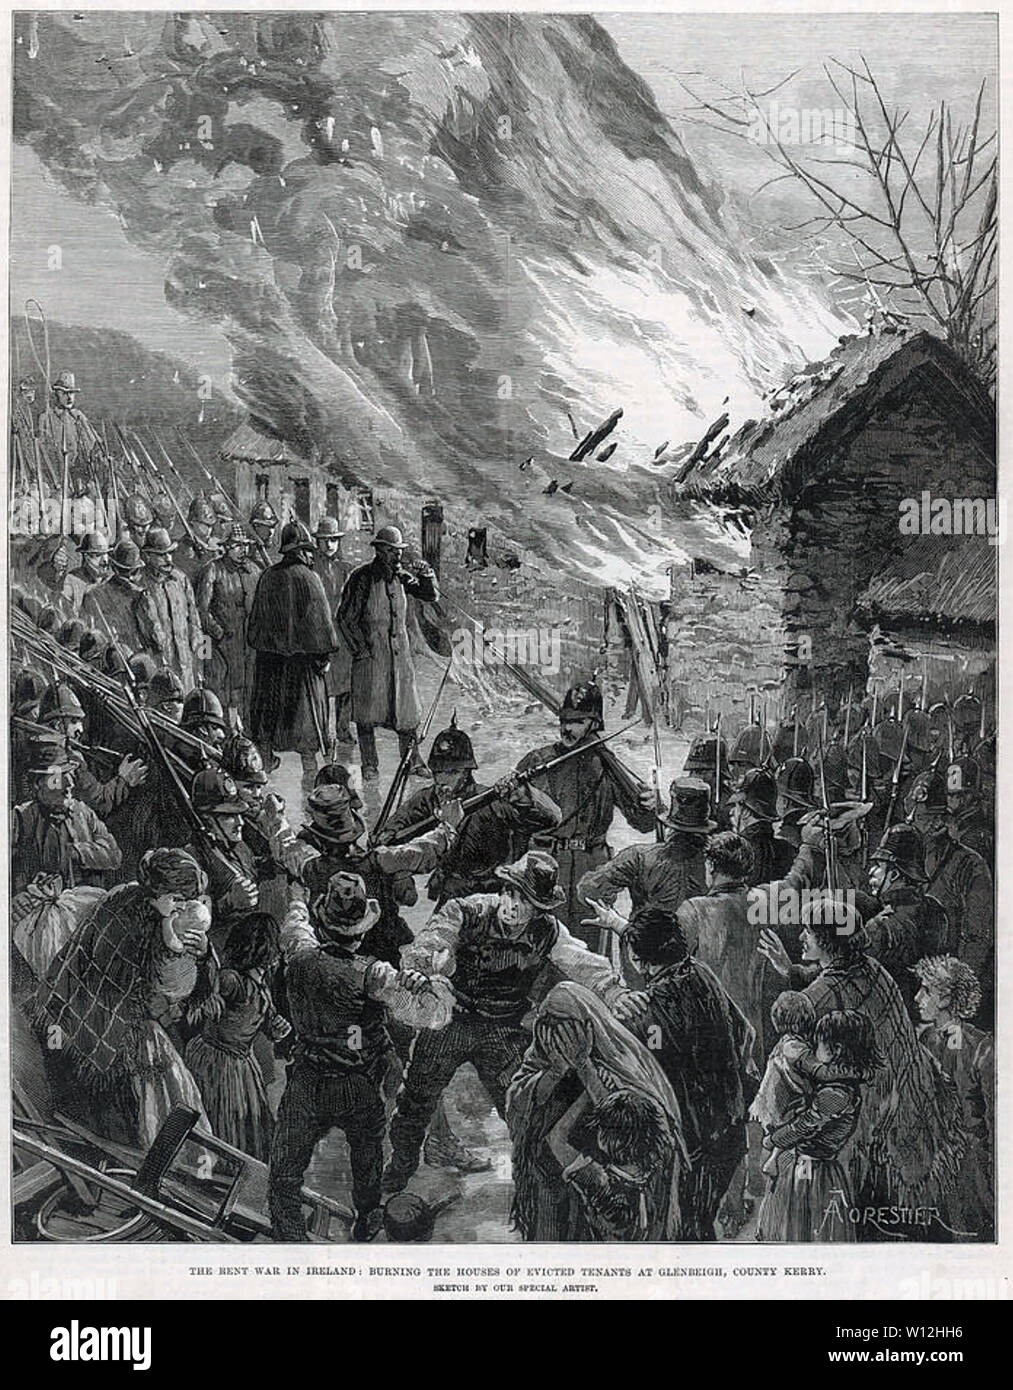 IRSH EVICTIONS during the Rent War. Burning the houses of evicted tenants in Glenbeigh, County Kerry, under the watch of Mr Roe, agent for estate owner Lord Headley Wynne in 1882 Stock Photo